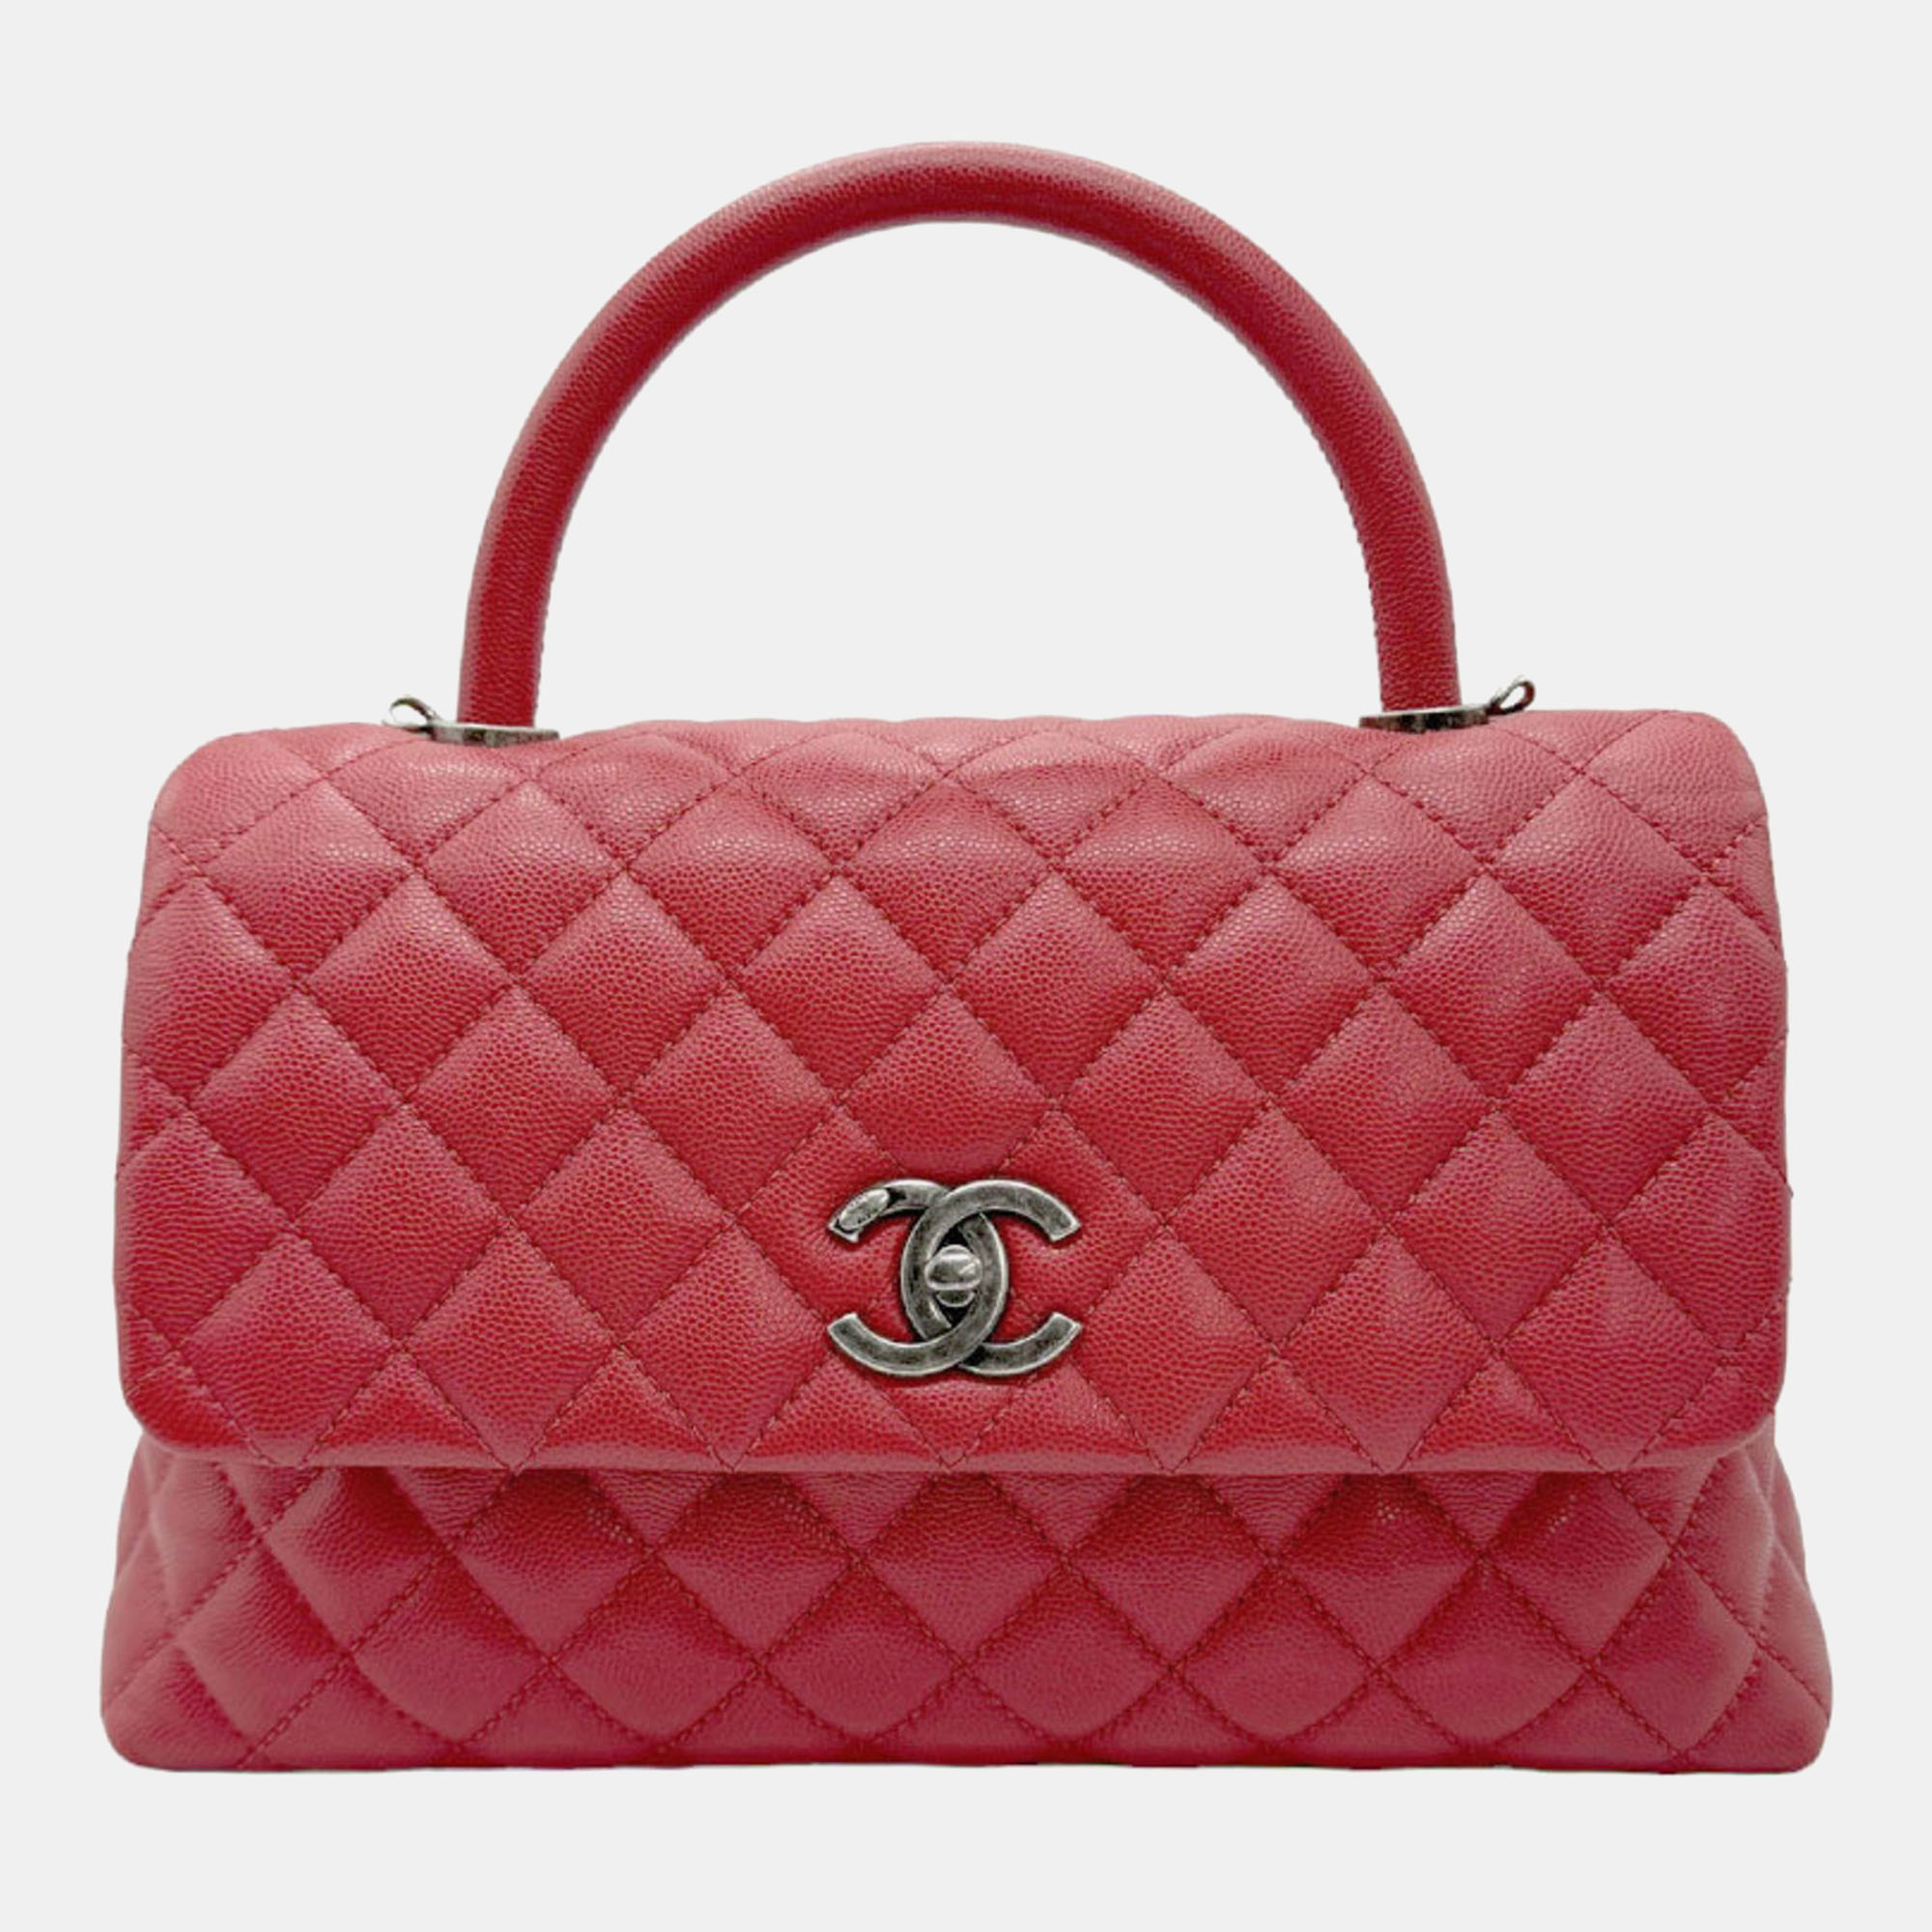 Chanel red leather medium coco handle top handle bag